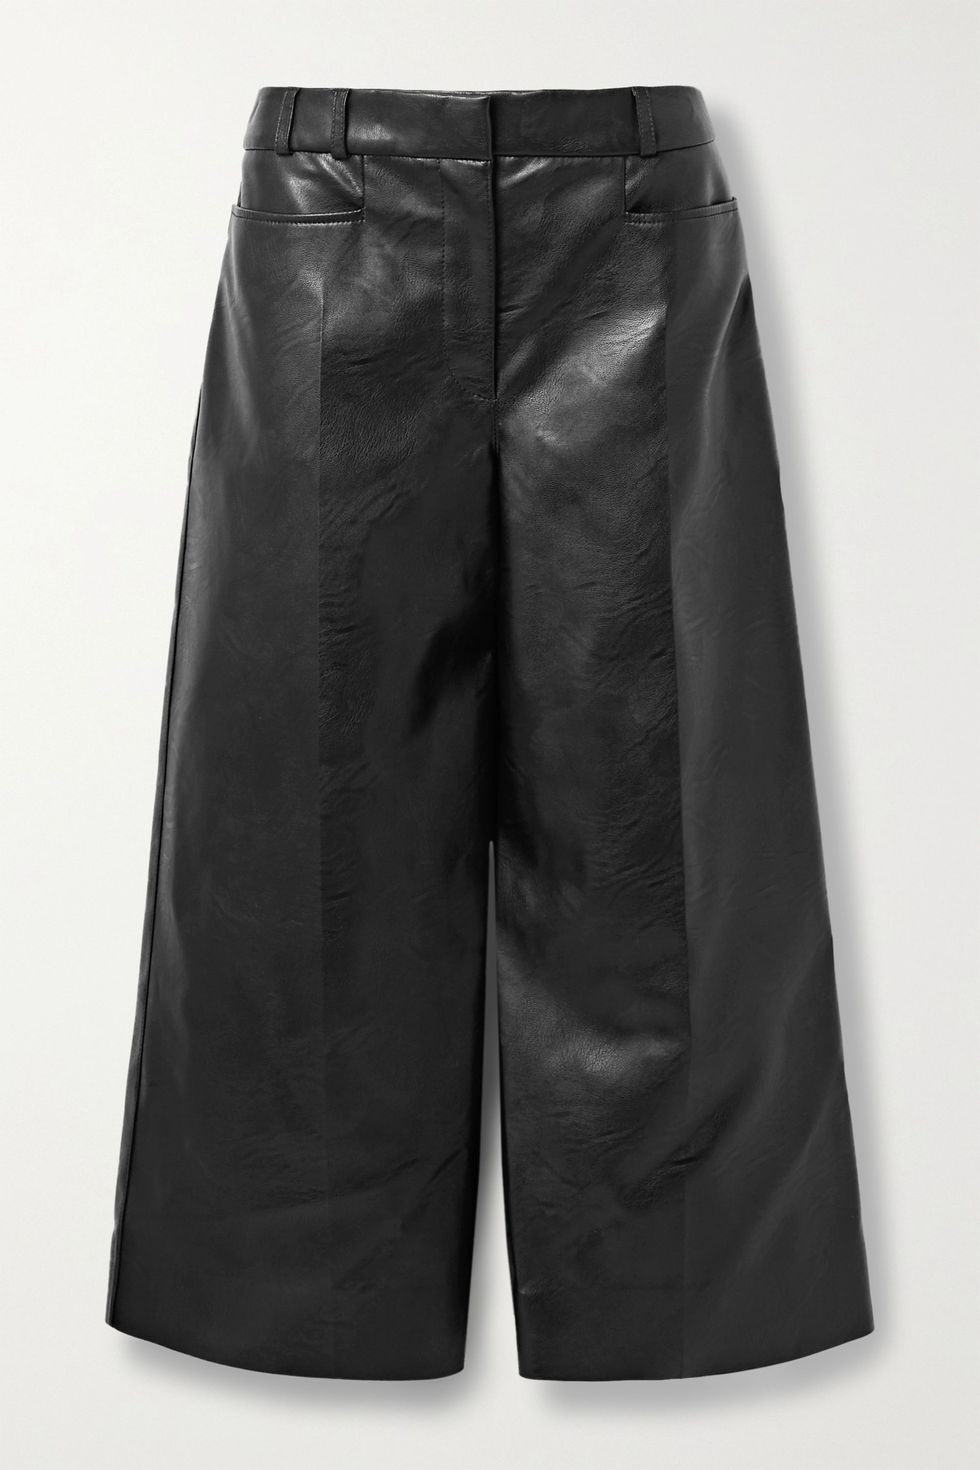 Charlotte vegetarian leather culottes